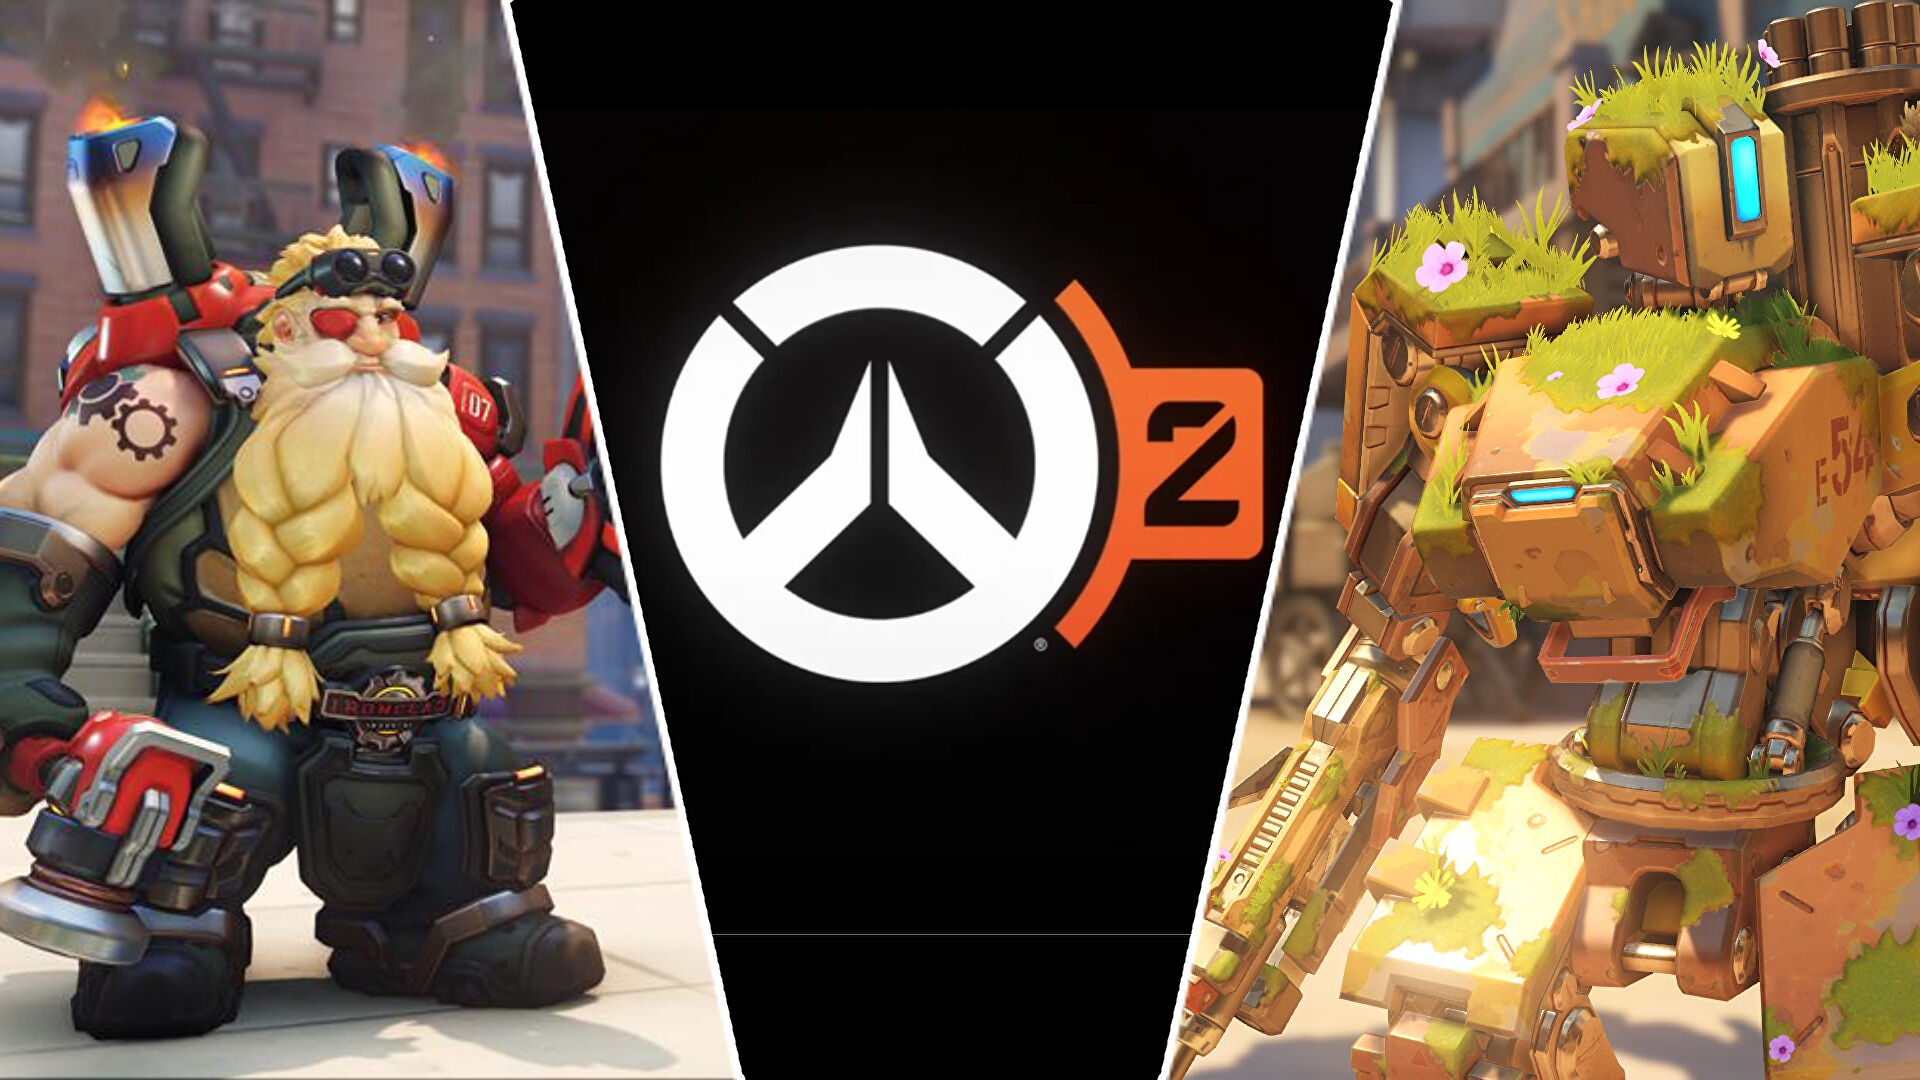 “It’s about time” – Bastion and Torbjorn are coming back to Overwatch 2 very soon